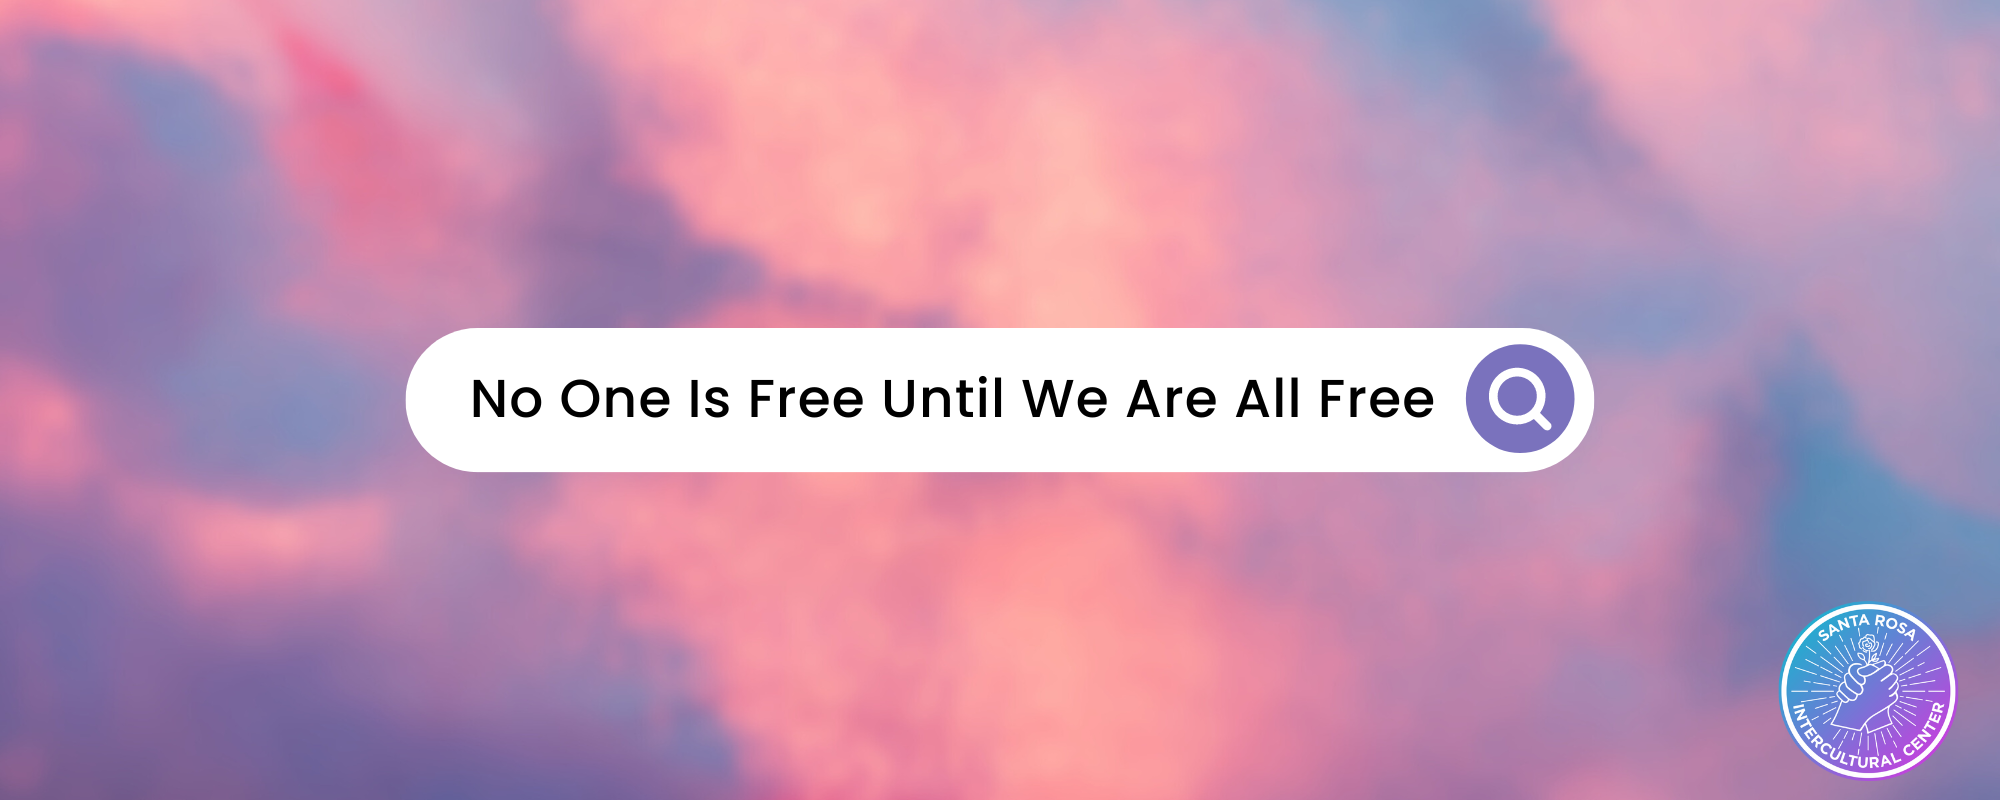 pink gradient background with the words "No One Is Free Until We Are All Free"